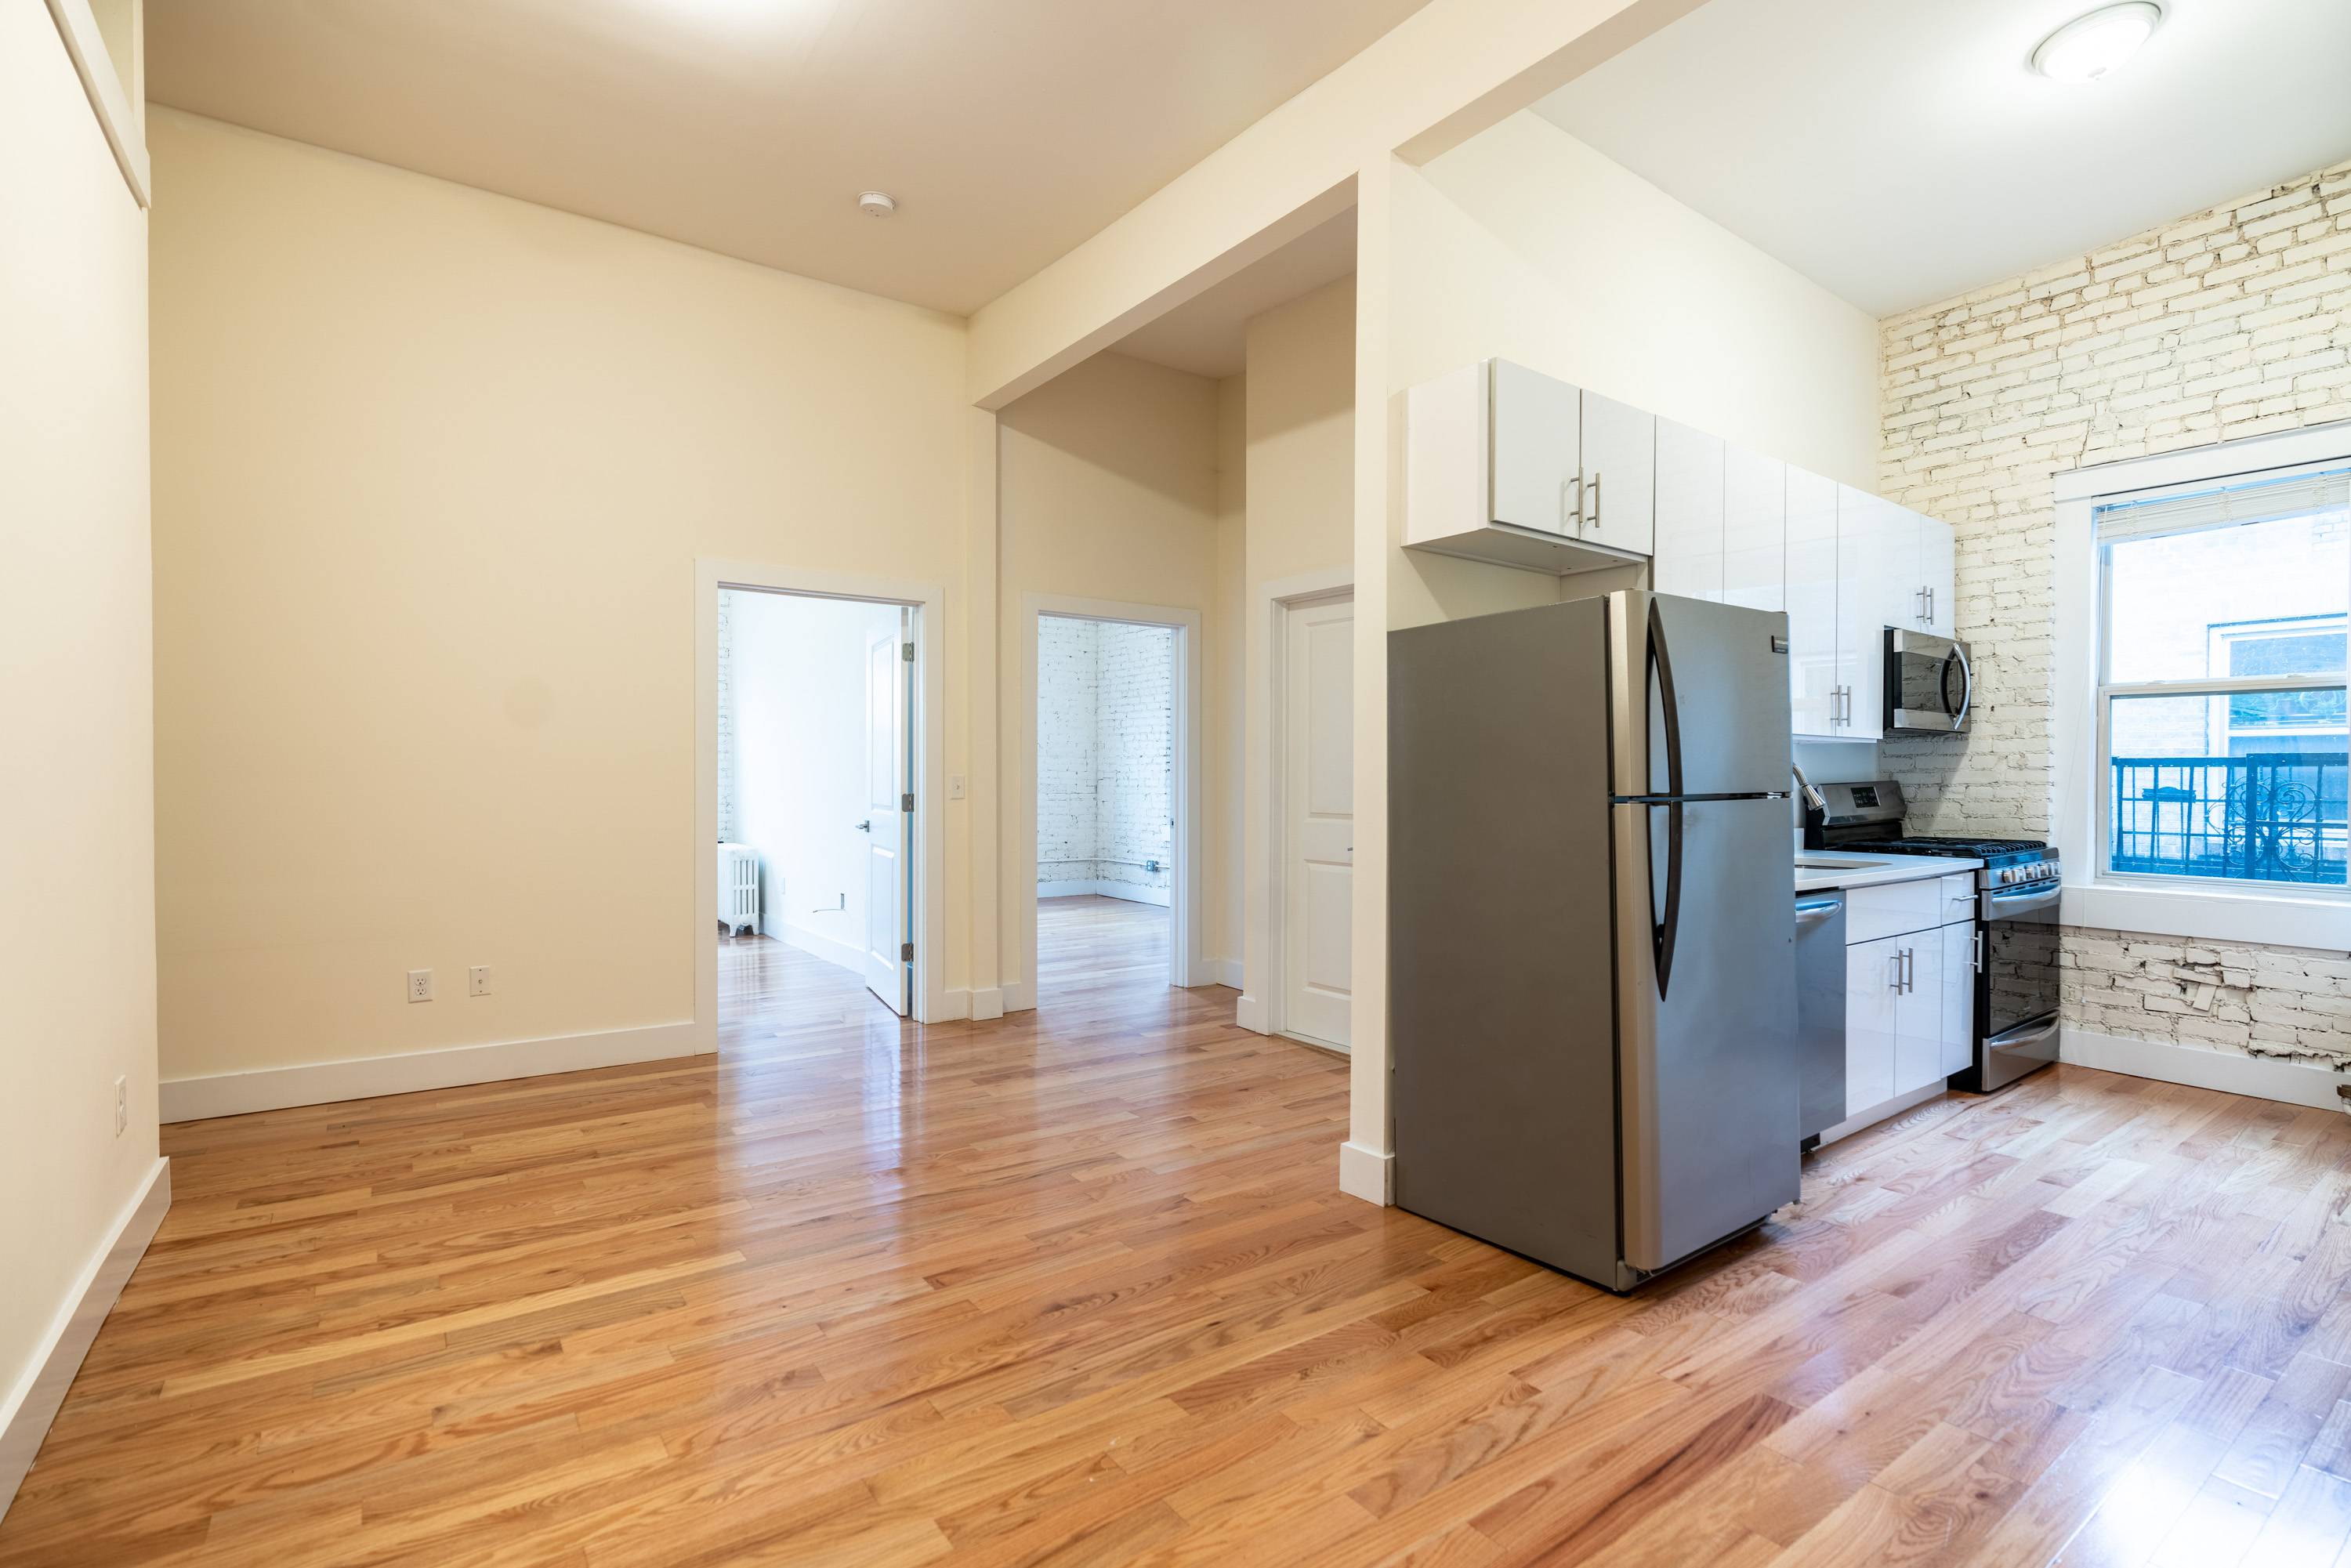 Stunning Top Floor Renovated 2BR with 11' Ceilings located Across the Street from the Journal Square Transportation Center and Path Station! Laundry On Site, On Site Super, No Broker Fees.